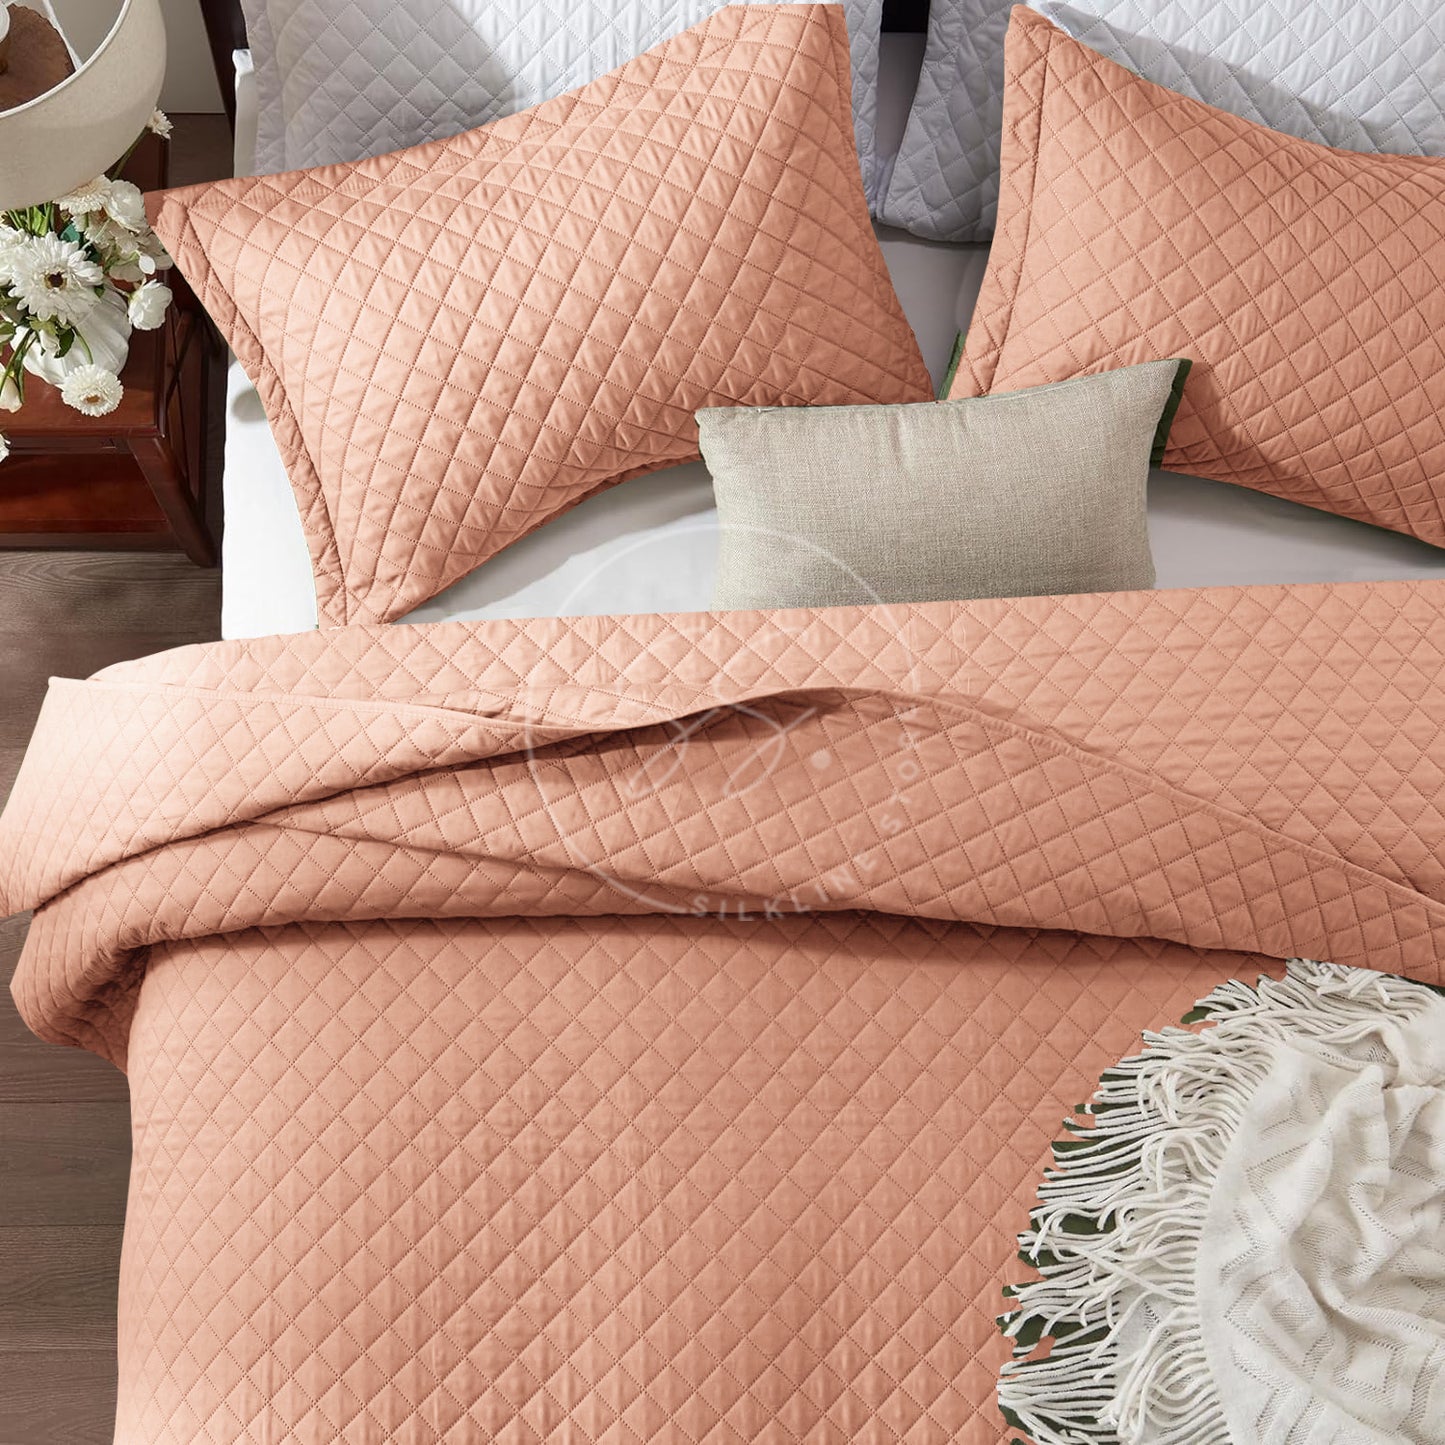 Peach - king Size Microfibre: Quilted 3 pcs bedspread set